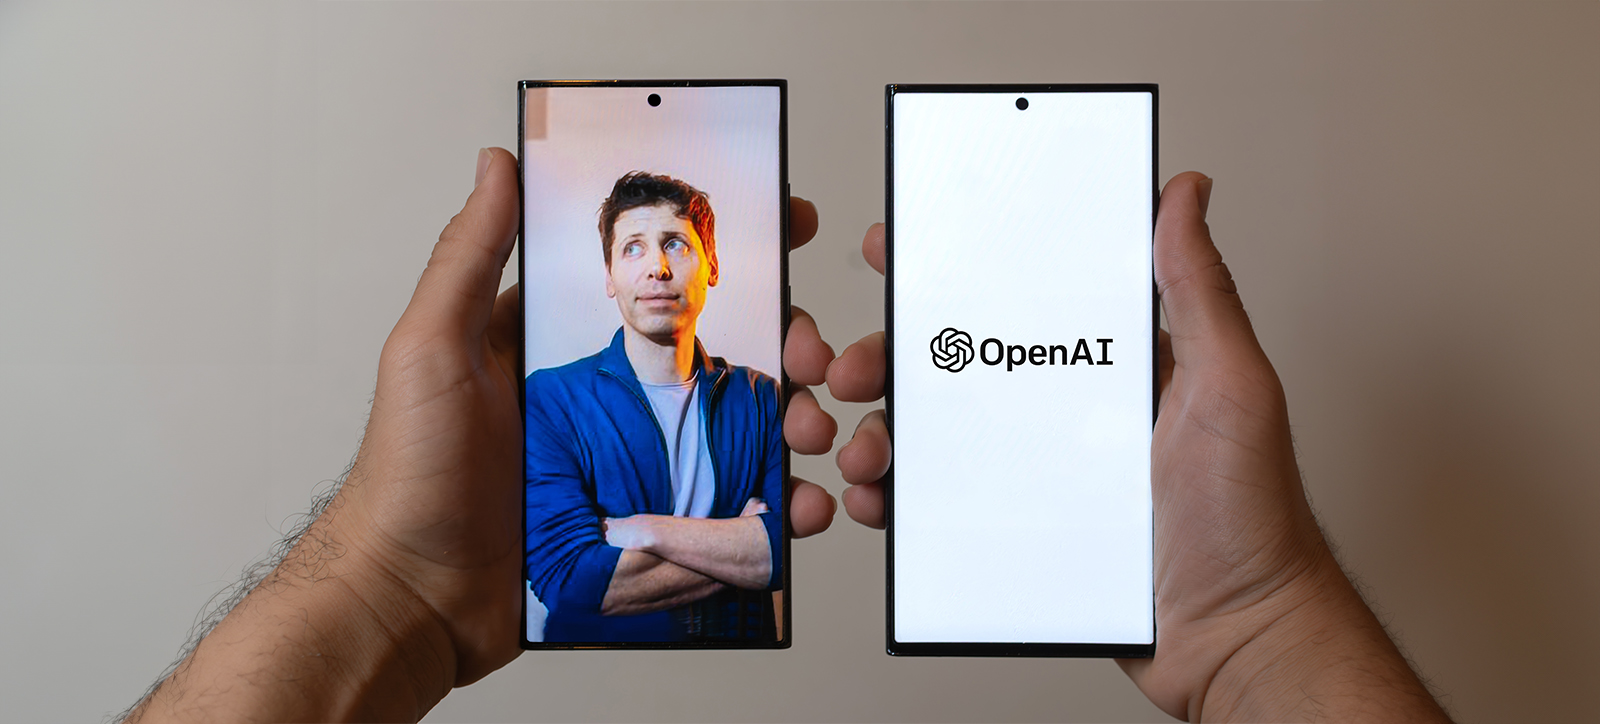 Two hands, each holding a mobile phone. One shows a photograph of ChatGPT creater Sam Altman stood with his sleeves rolled up and arms crossed, the other shows the OpenAI logo.